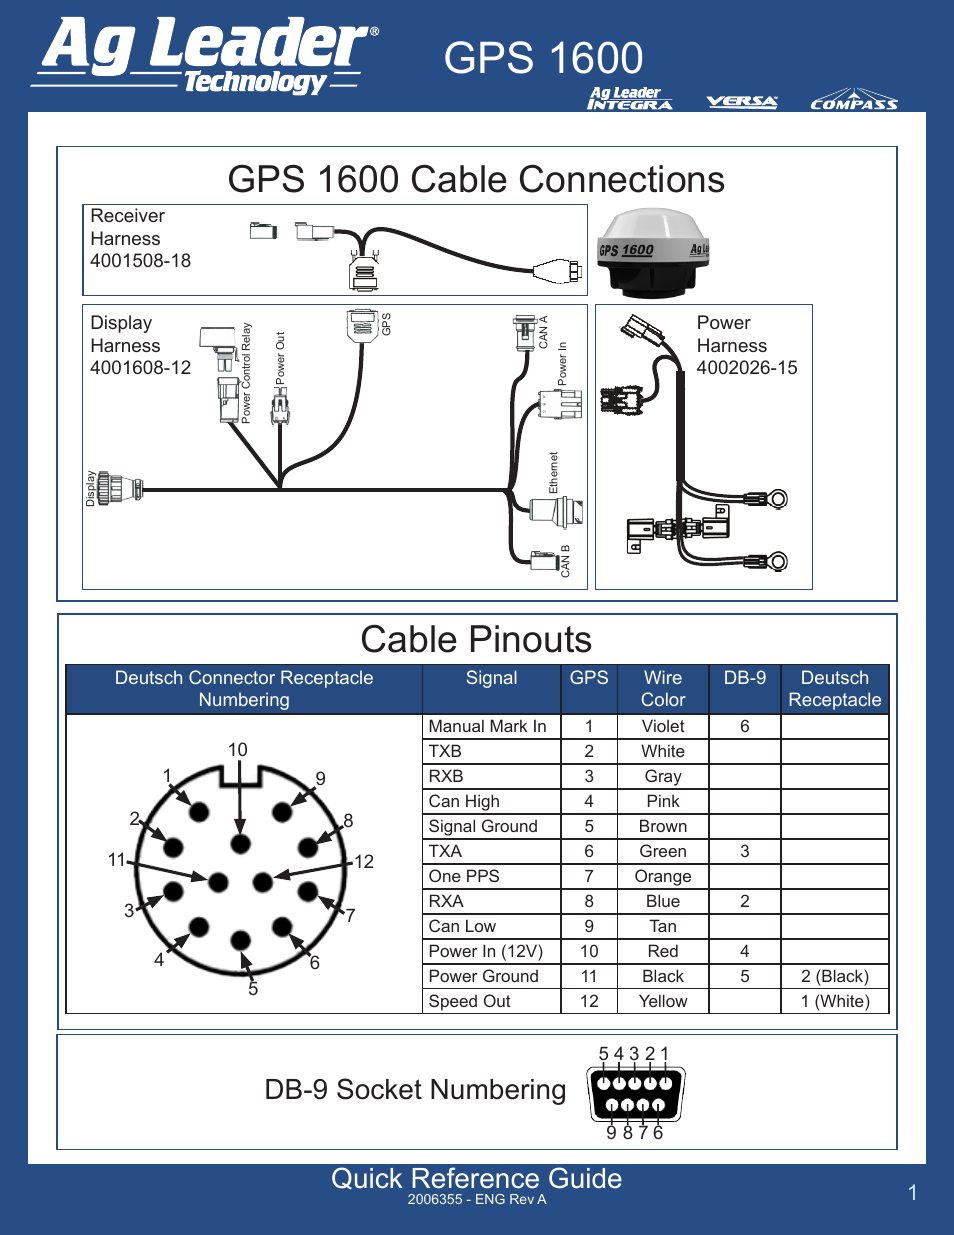 GPS 1600 Quick Reference Guide